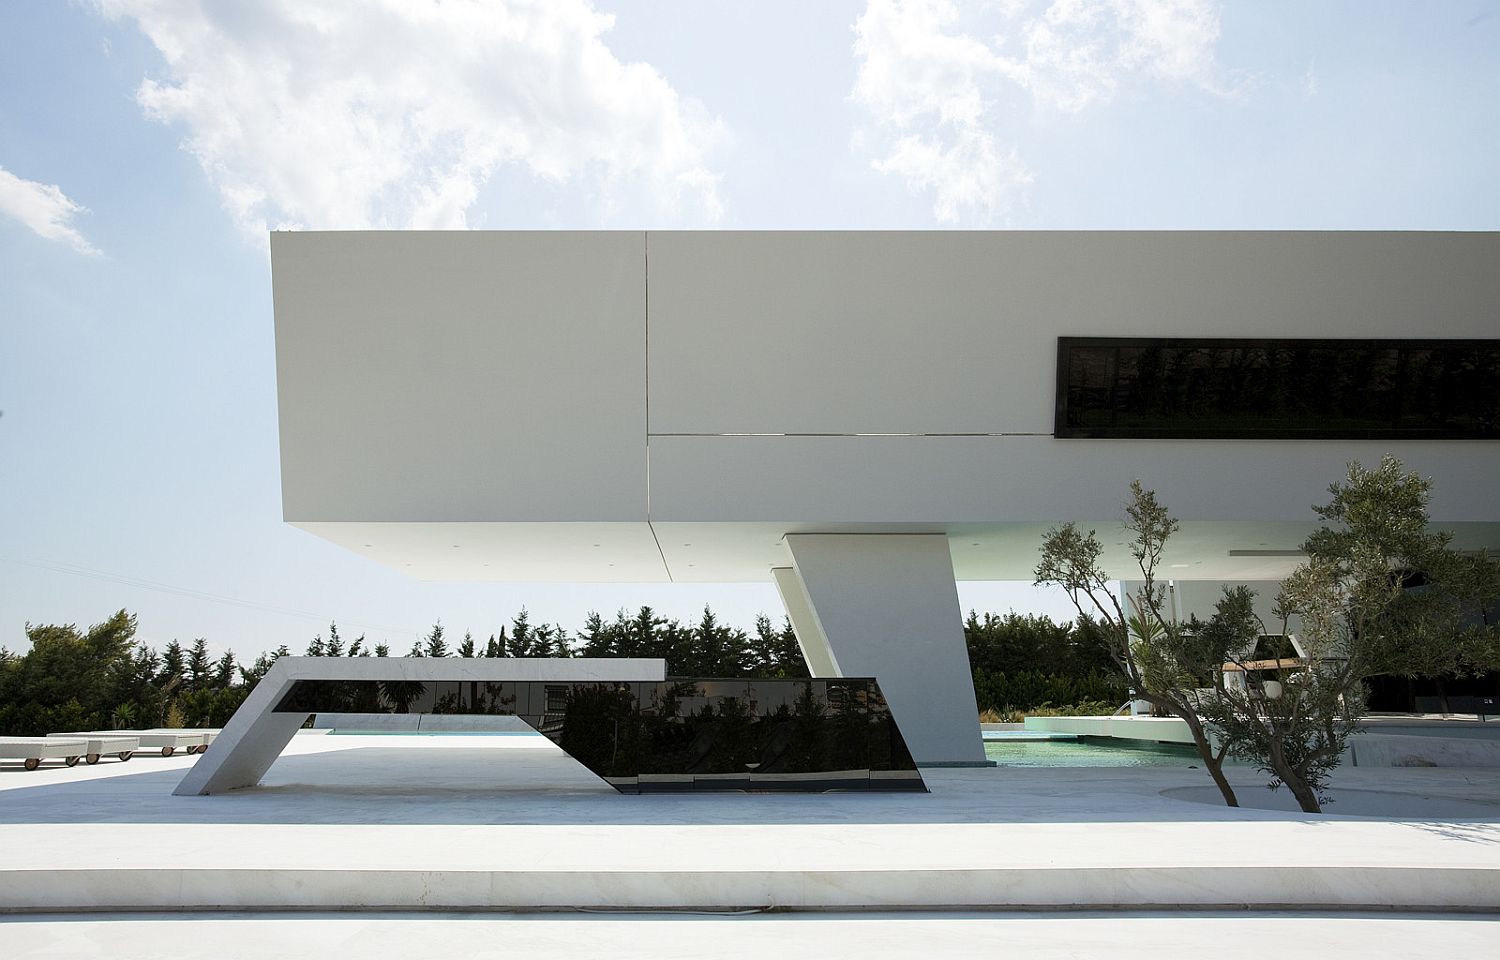 Cantilevered-structure-of-the-house-offers-natural-shade